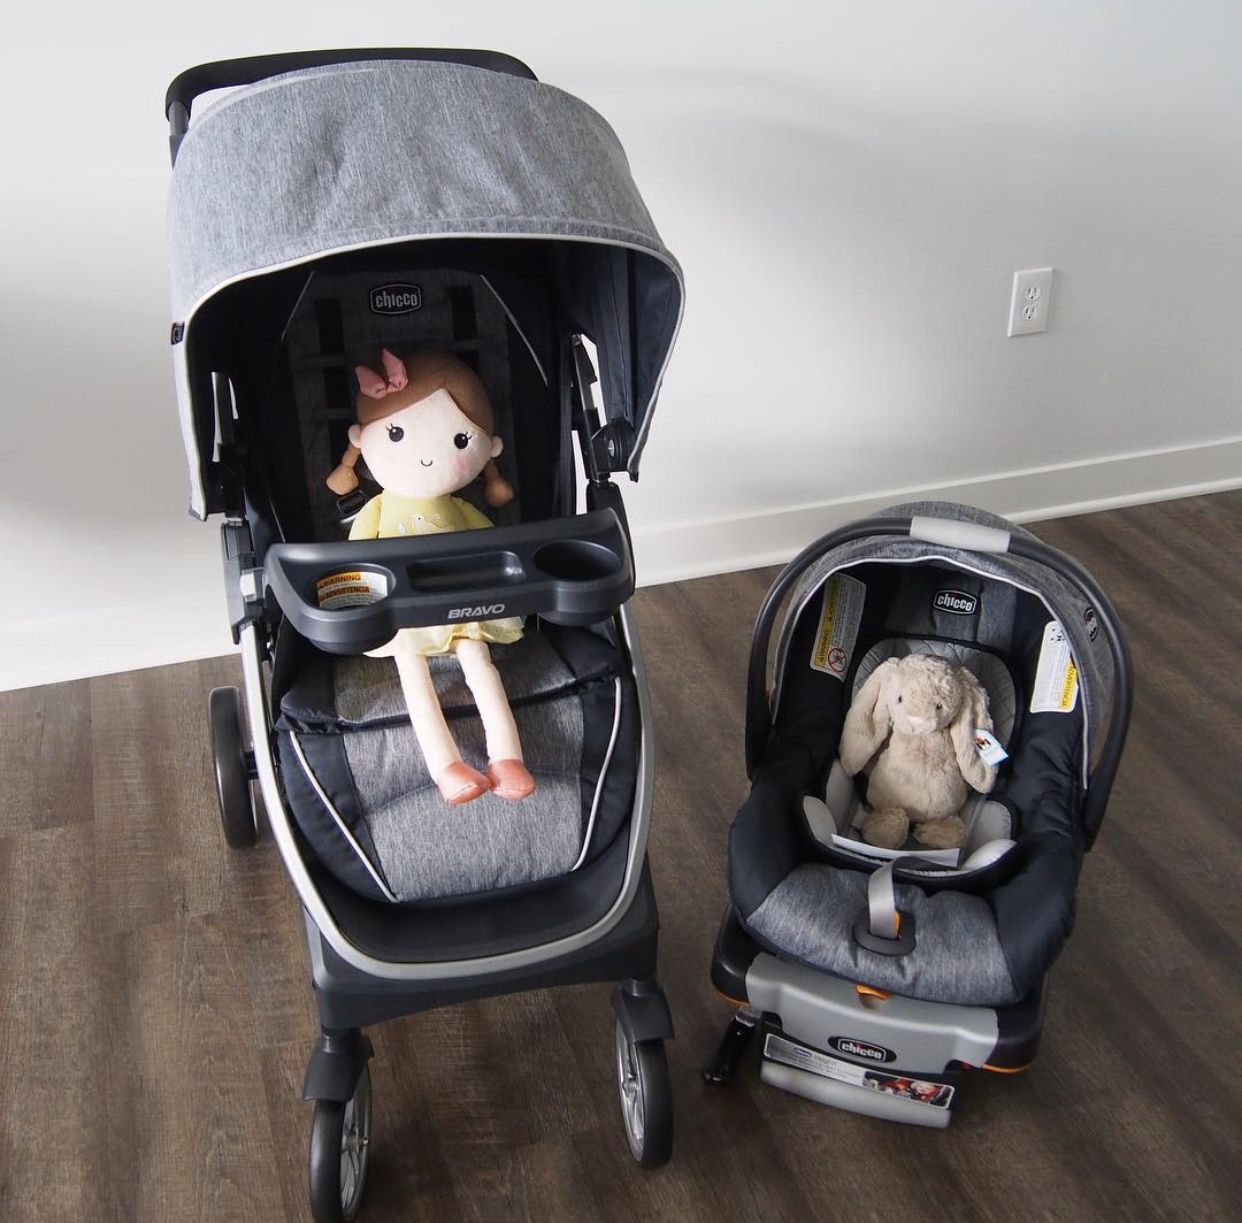 Brand new chicco Bravo stroller and car seat for sale